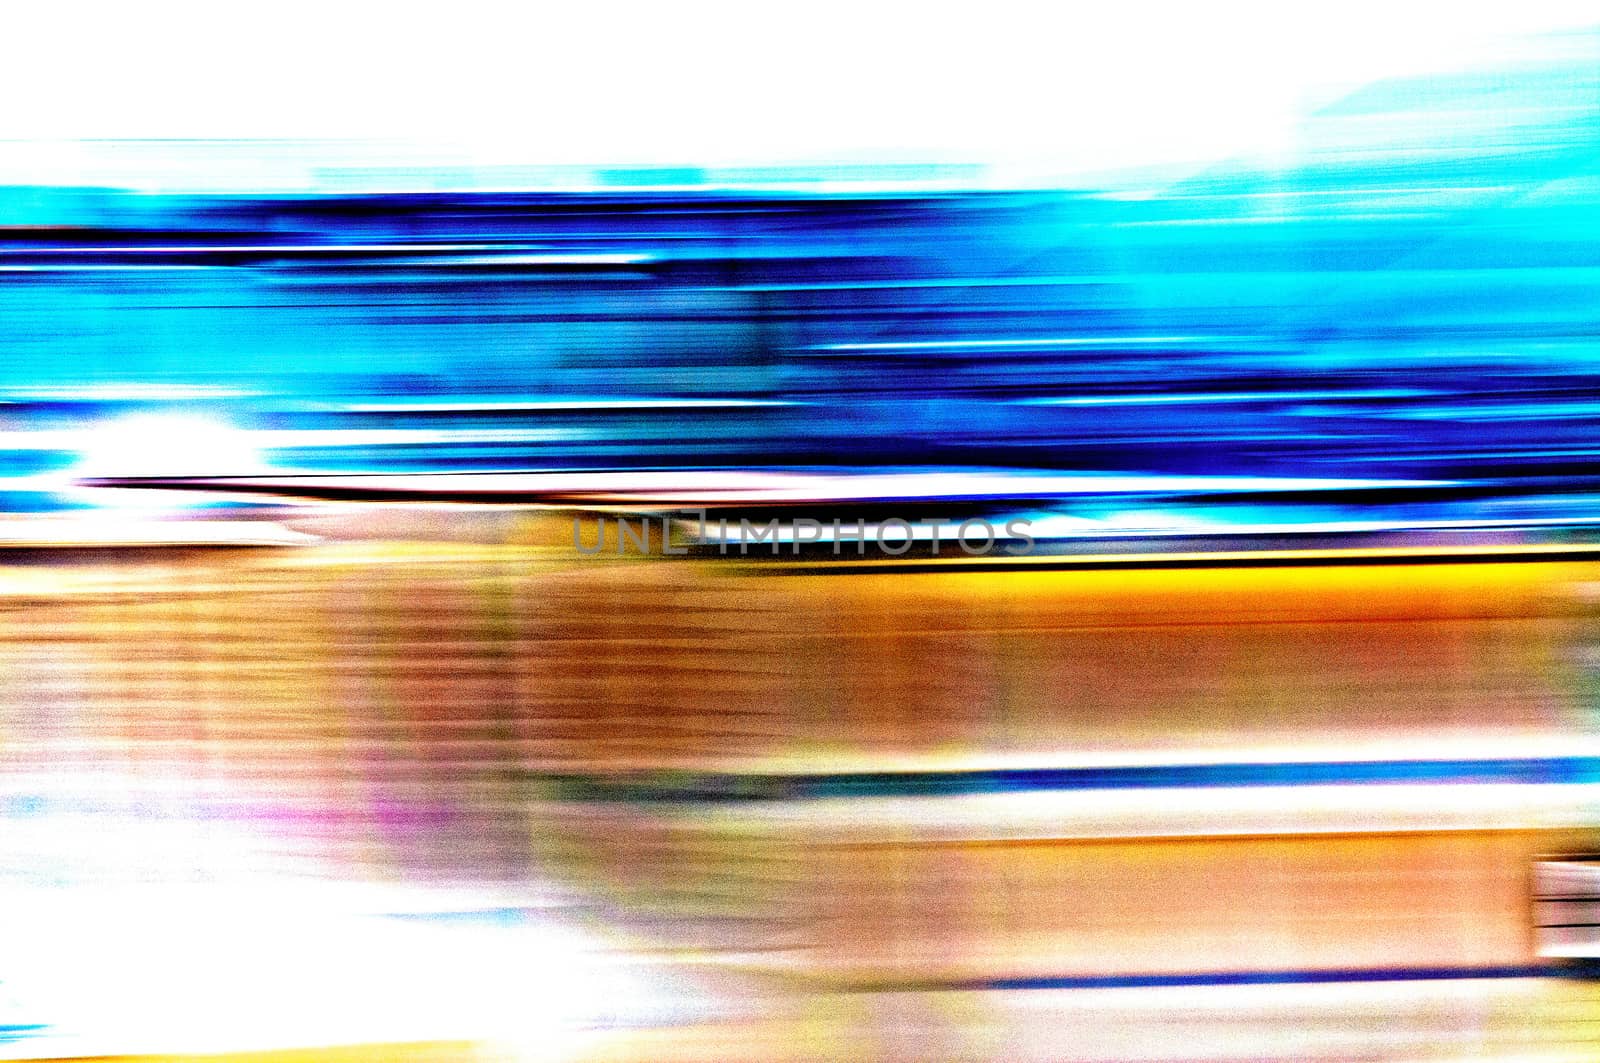 A blue and orange abstract photographic view of buildings in movement in the city, with a grain reticulation texture effect